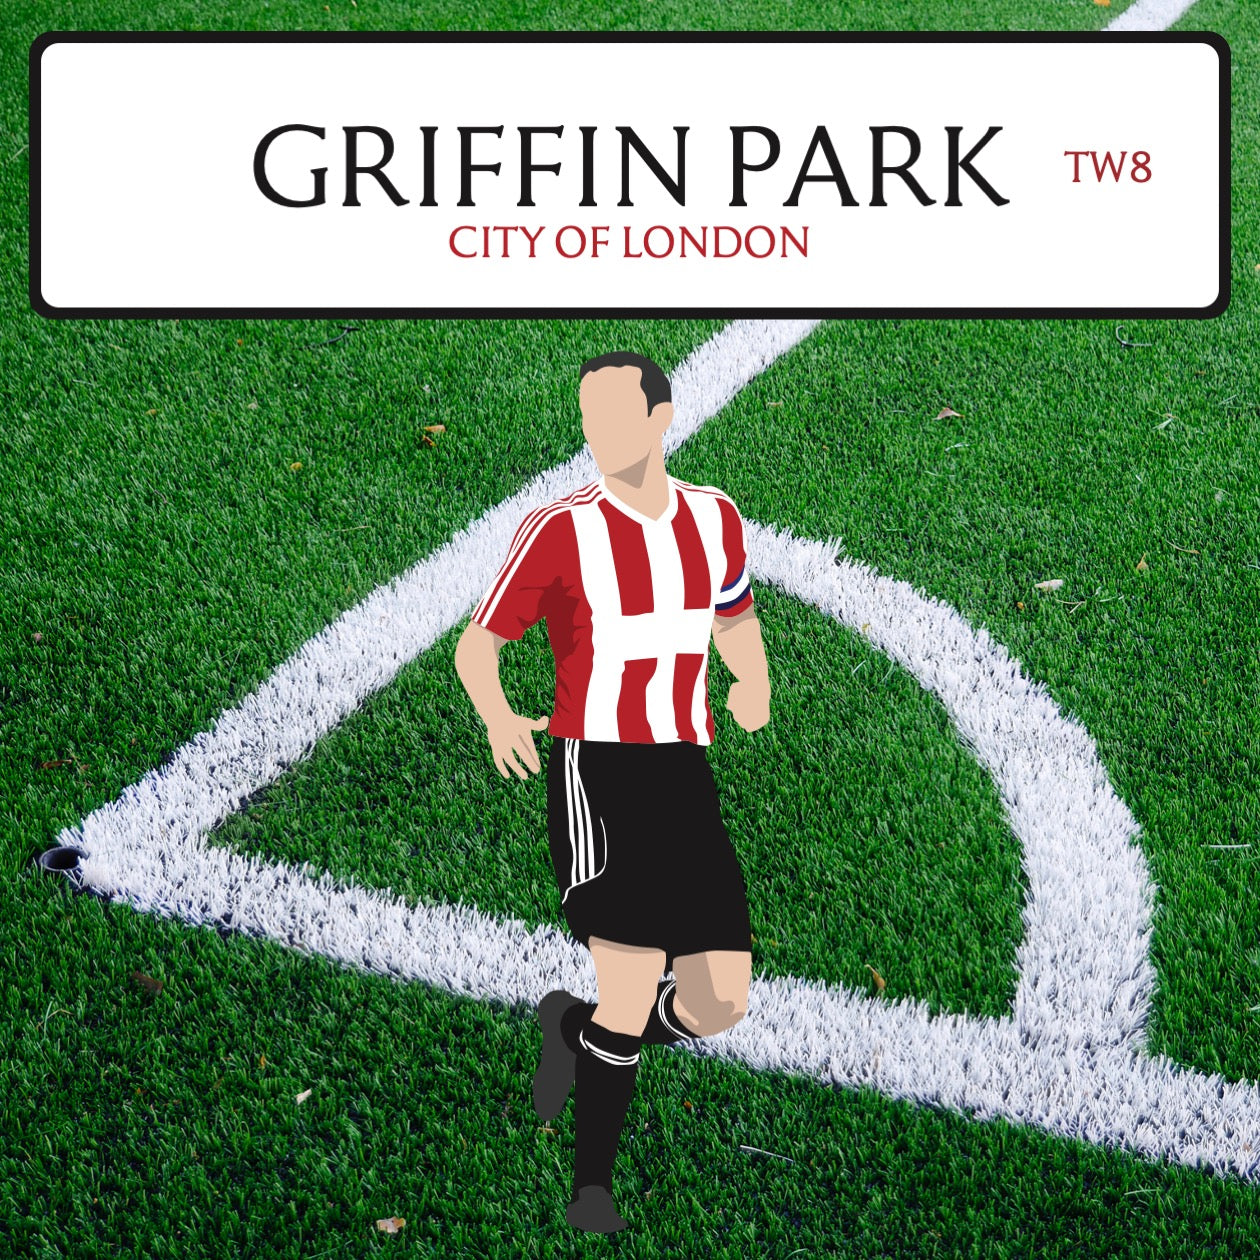 Griffin Park Wing Chair (Brentford FC)